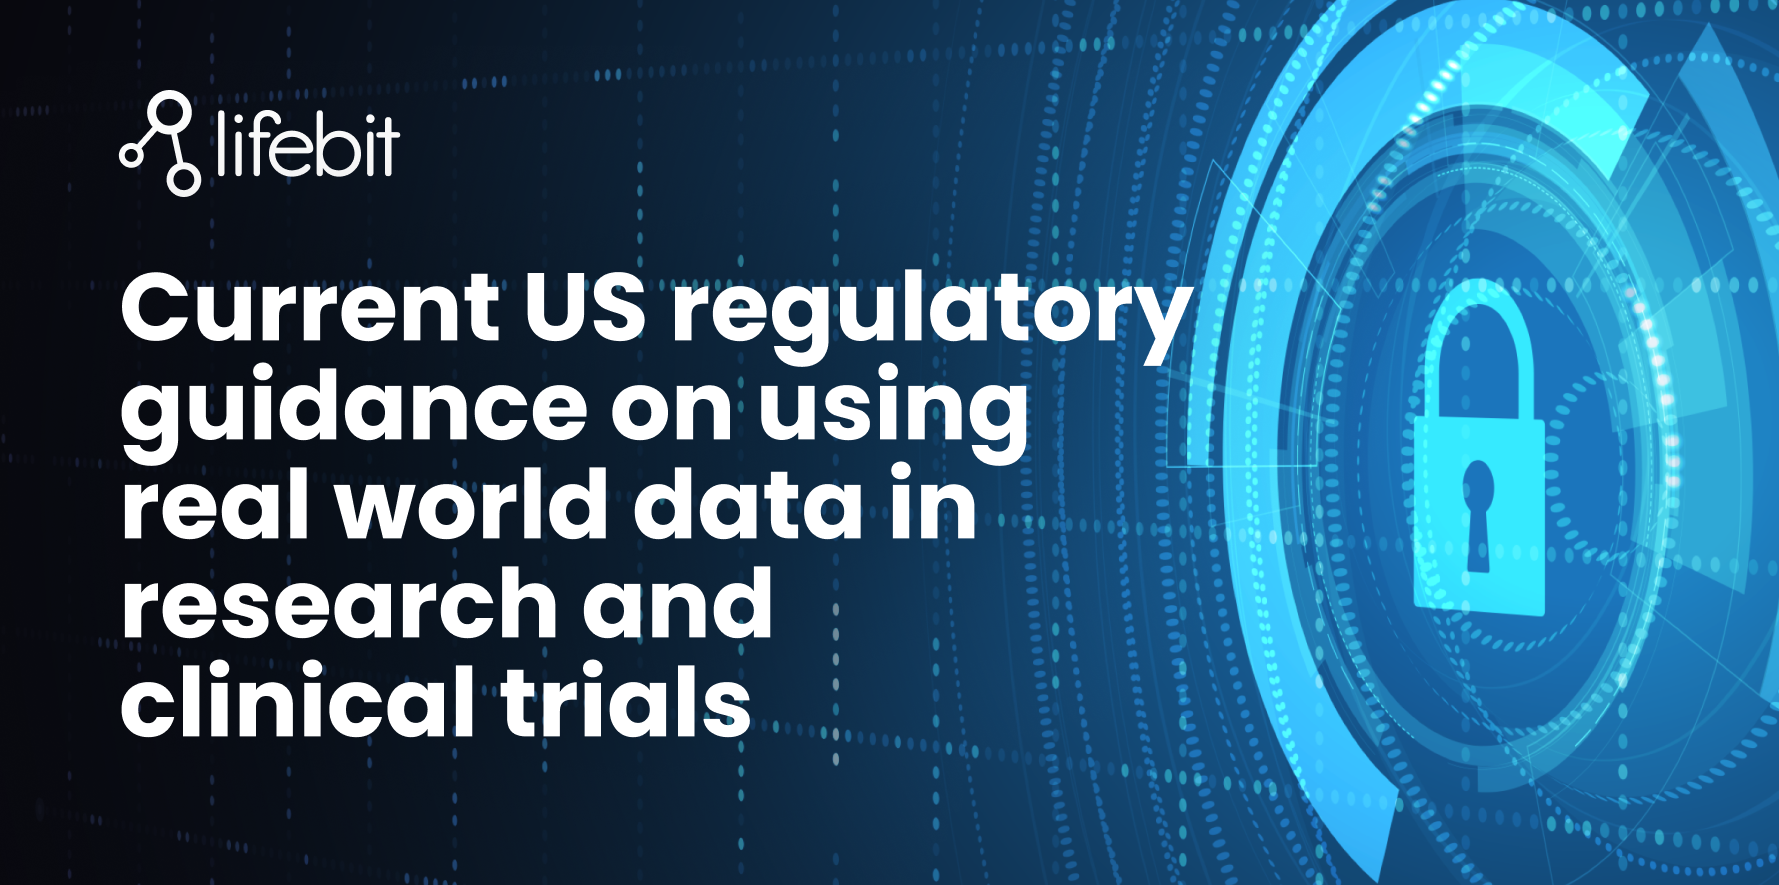 Current US regulatory guidance on using real world data in research and clinical trials